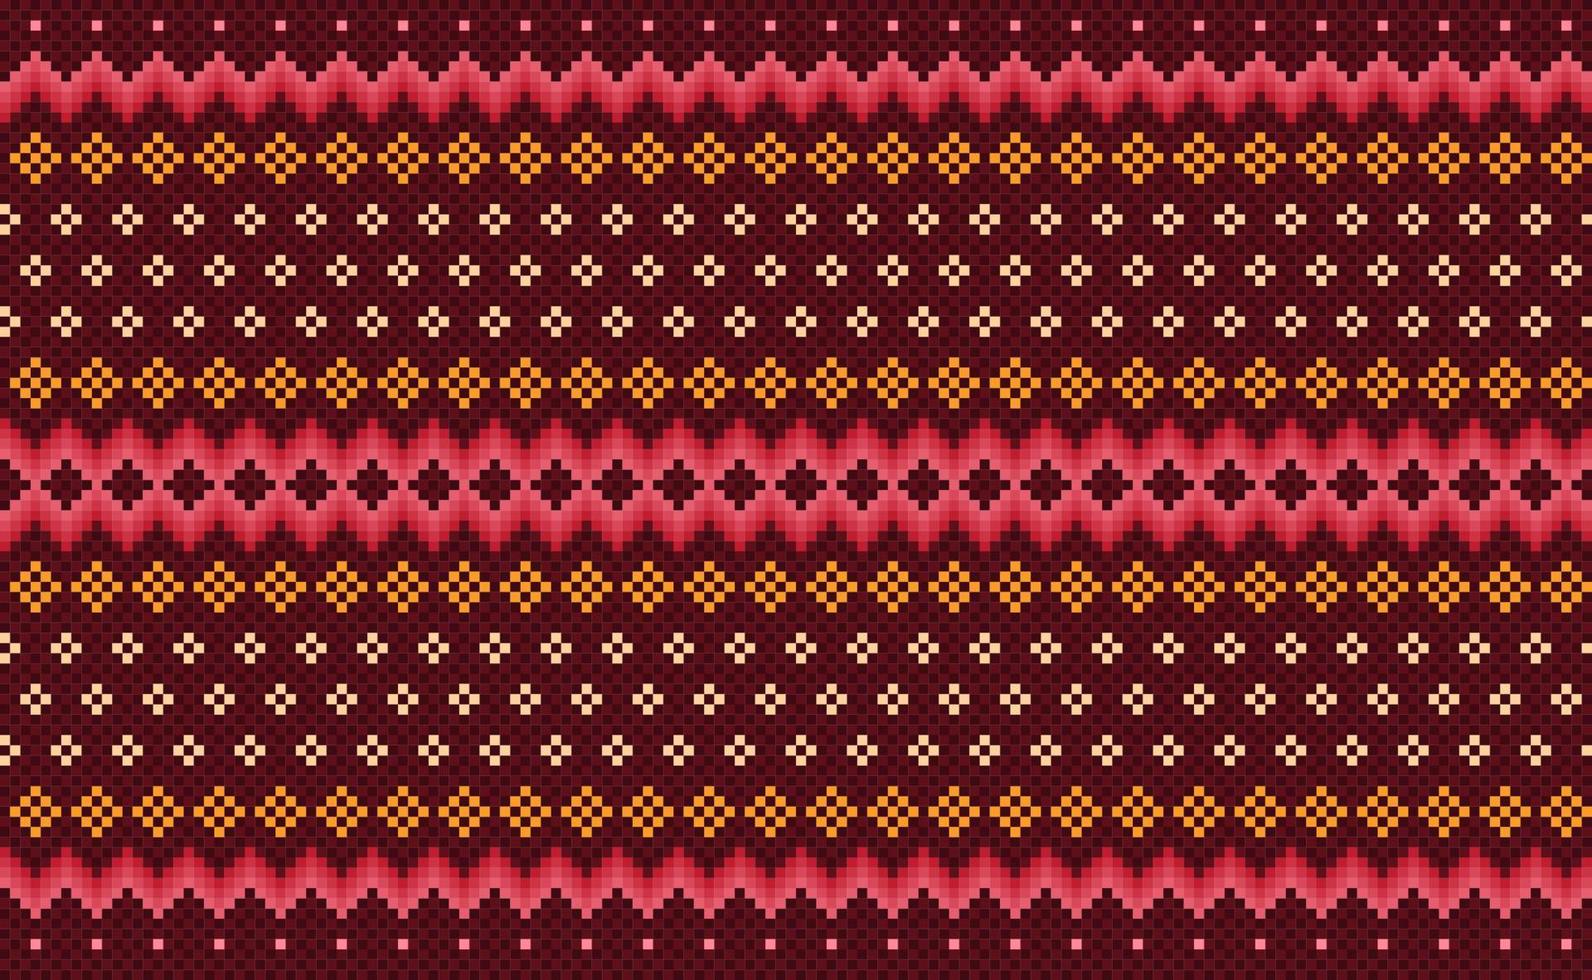 Pixel ethnic pattern, Vector embroidery ikat background, Geometric folk Boho style, Red and orange pattern Nordic repetitive, Design for textile, fabric, curtain, kaftan, tapestries